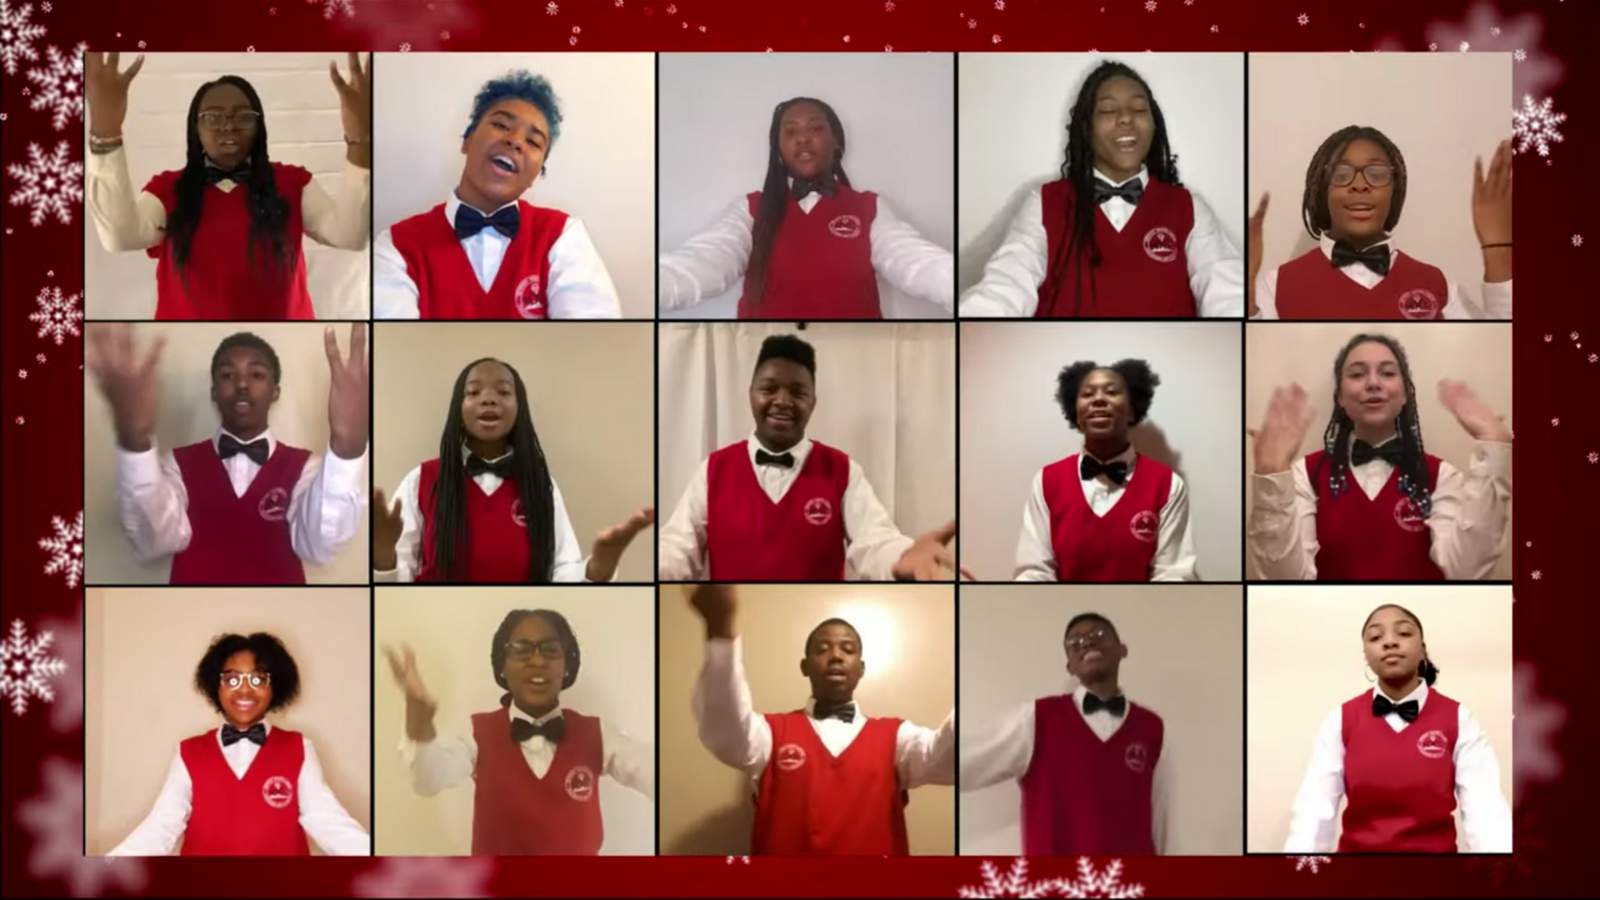 Detroit Youth Choir virtually performs debut Christmas EP in new video